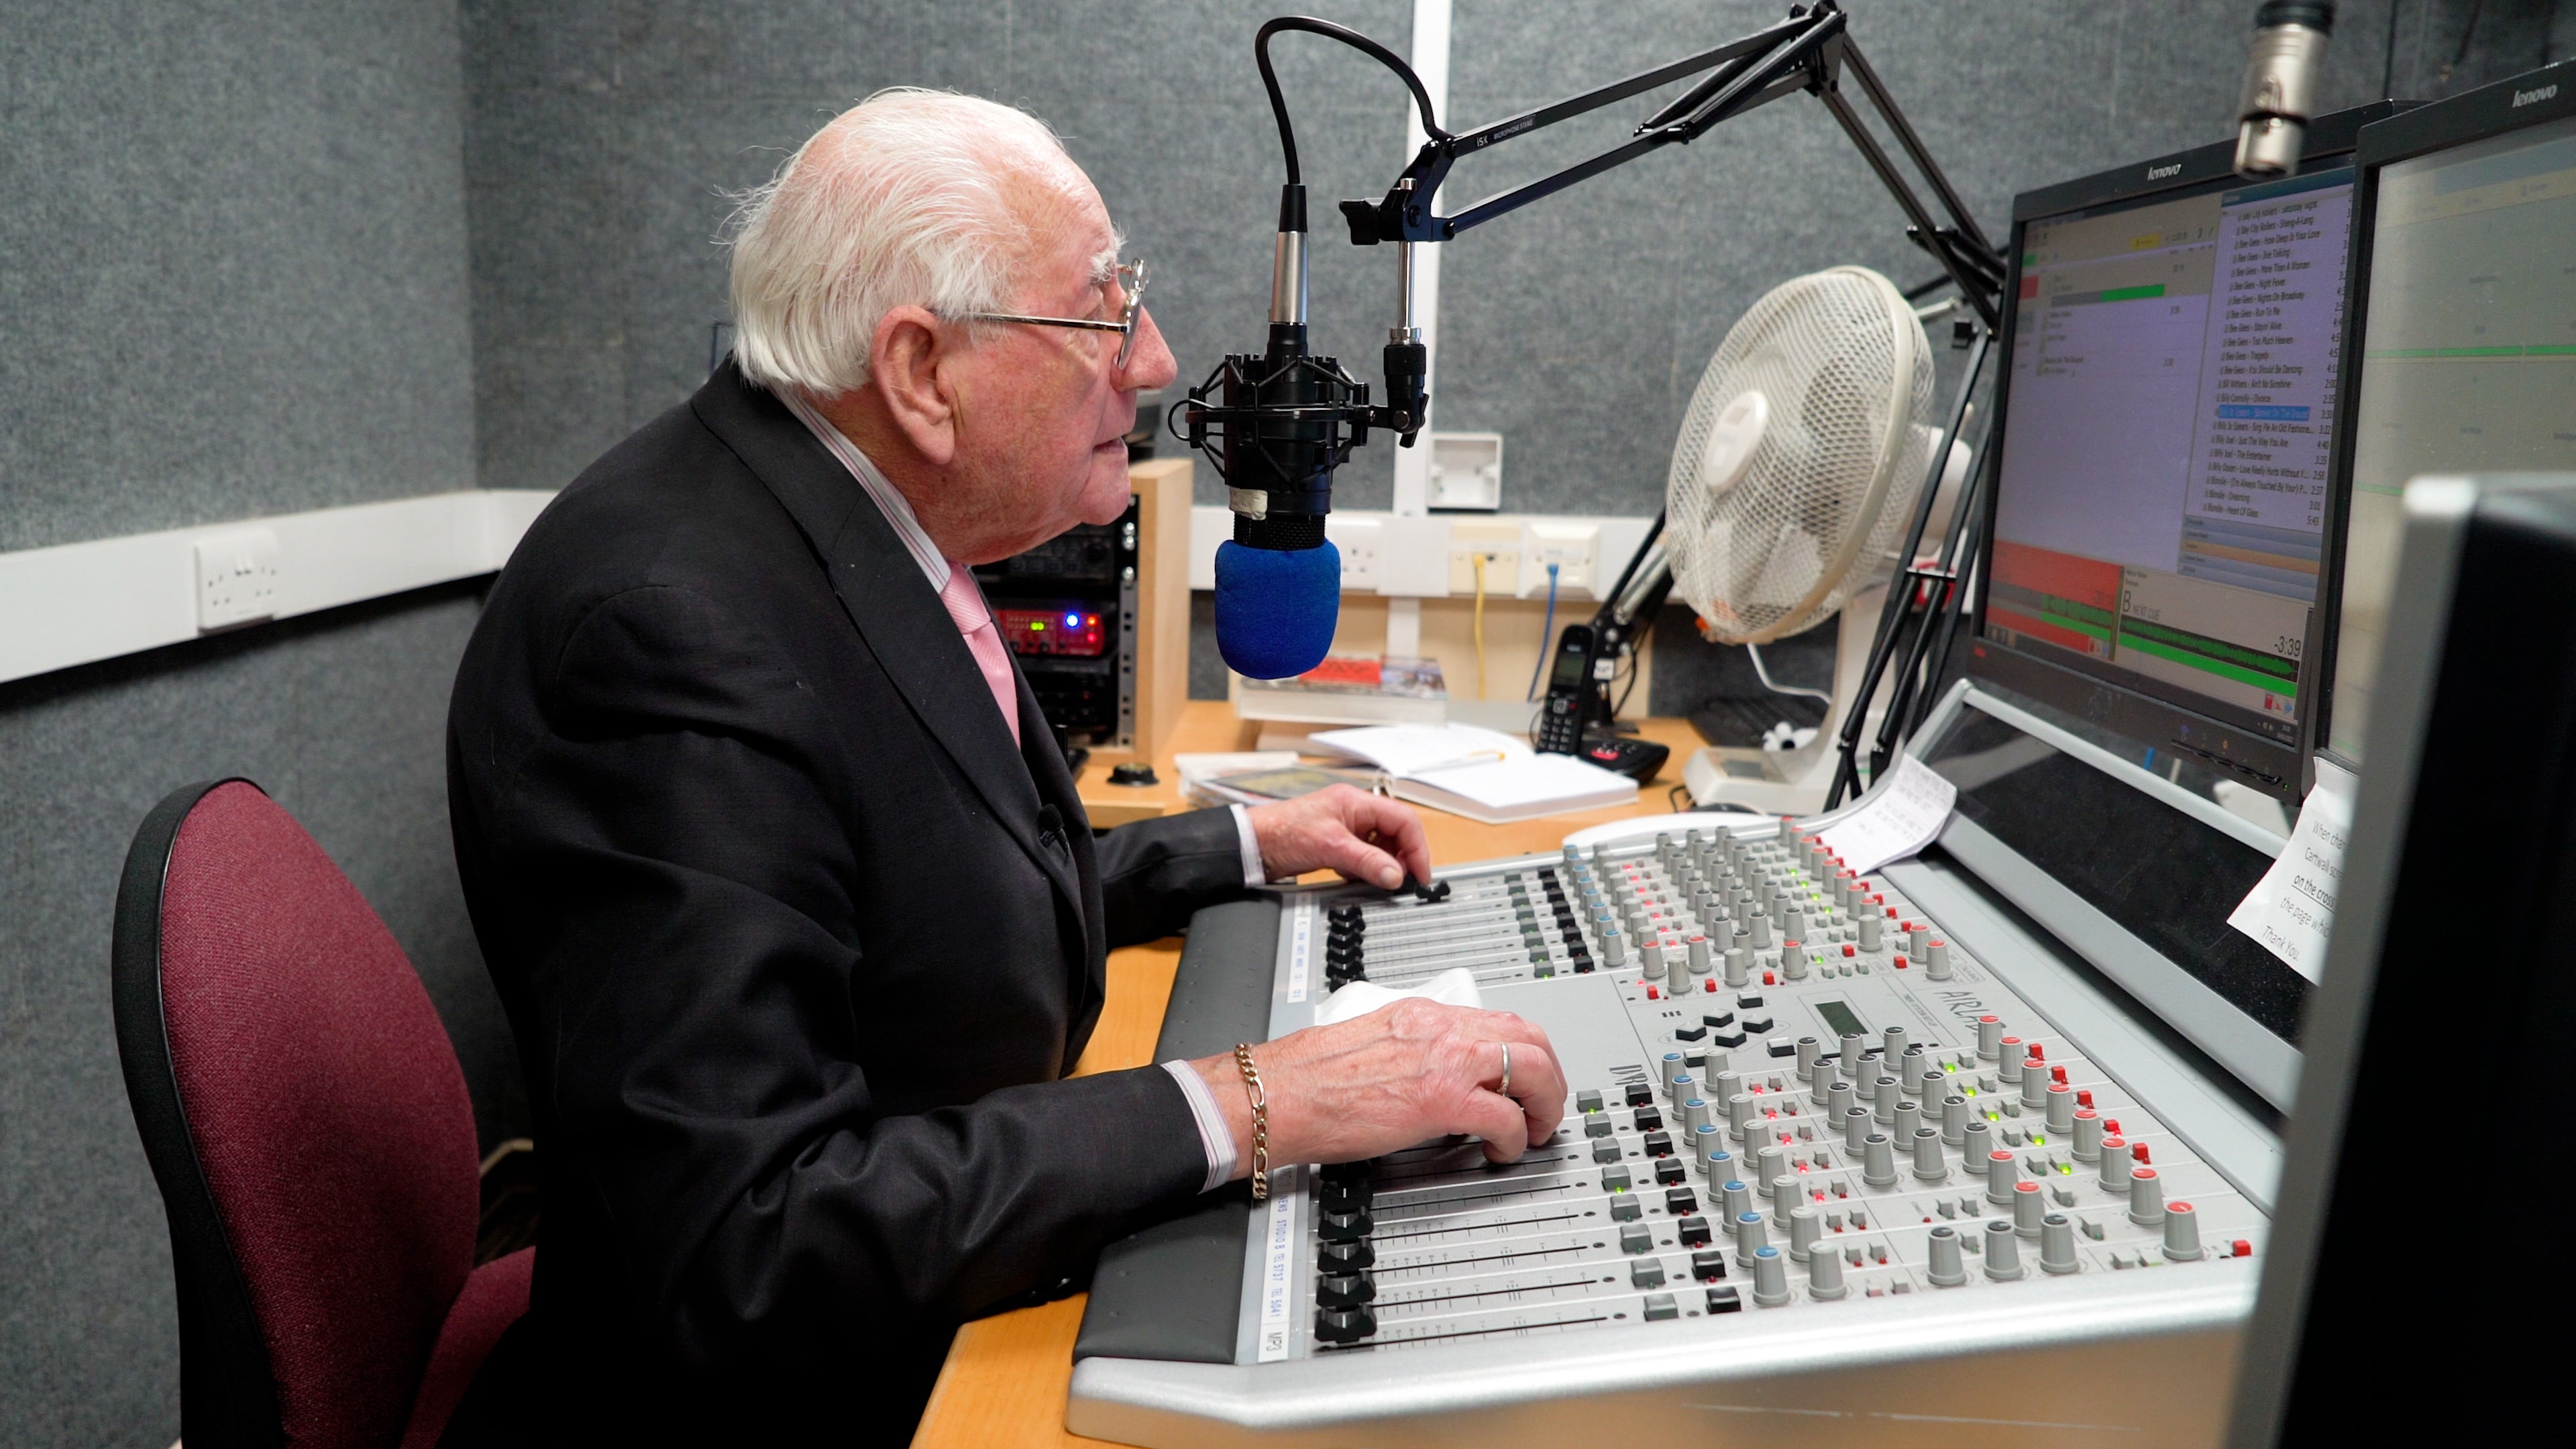 Patrick Murphy, from Bradford, has had a twice weekly show on St Luke’s Sound Hospital Radio for the past decade after he ‘got bored’ with retirement (Bradford Teaching Hospitals NHS Foundation Trust/PA)